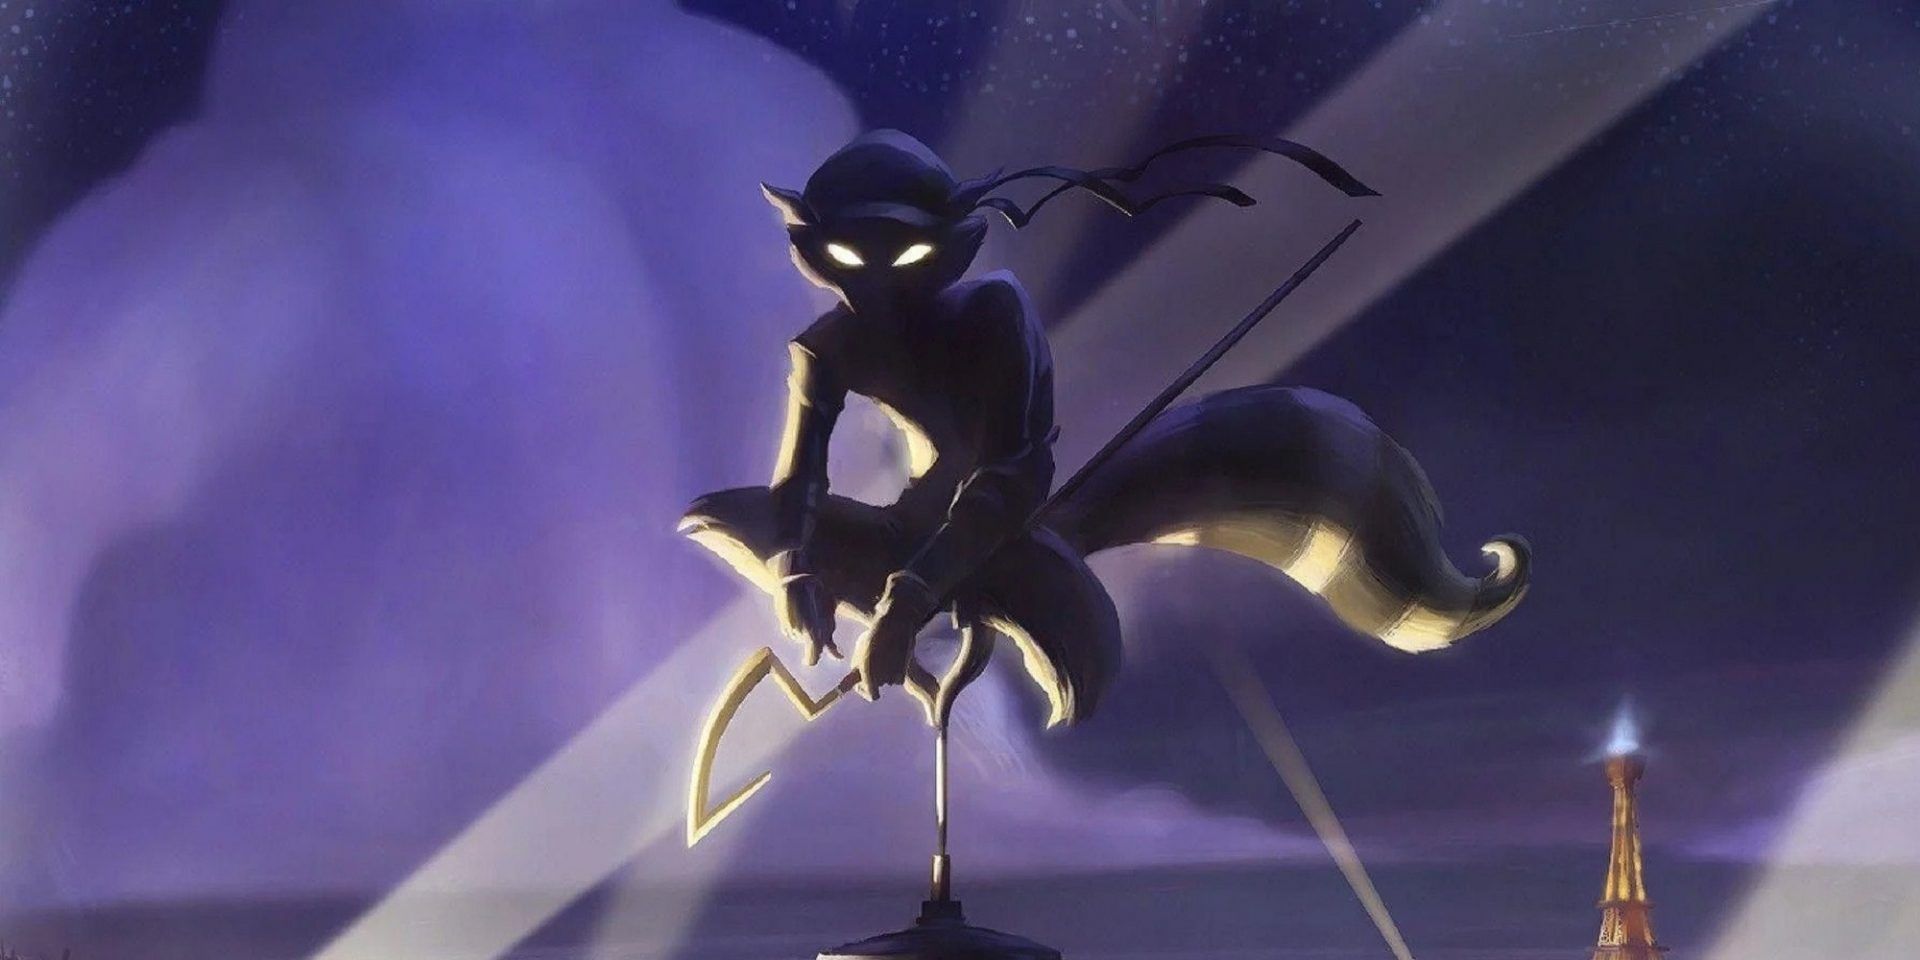 Sly Cooper Silhouette Crouching Atop A Building